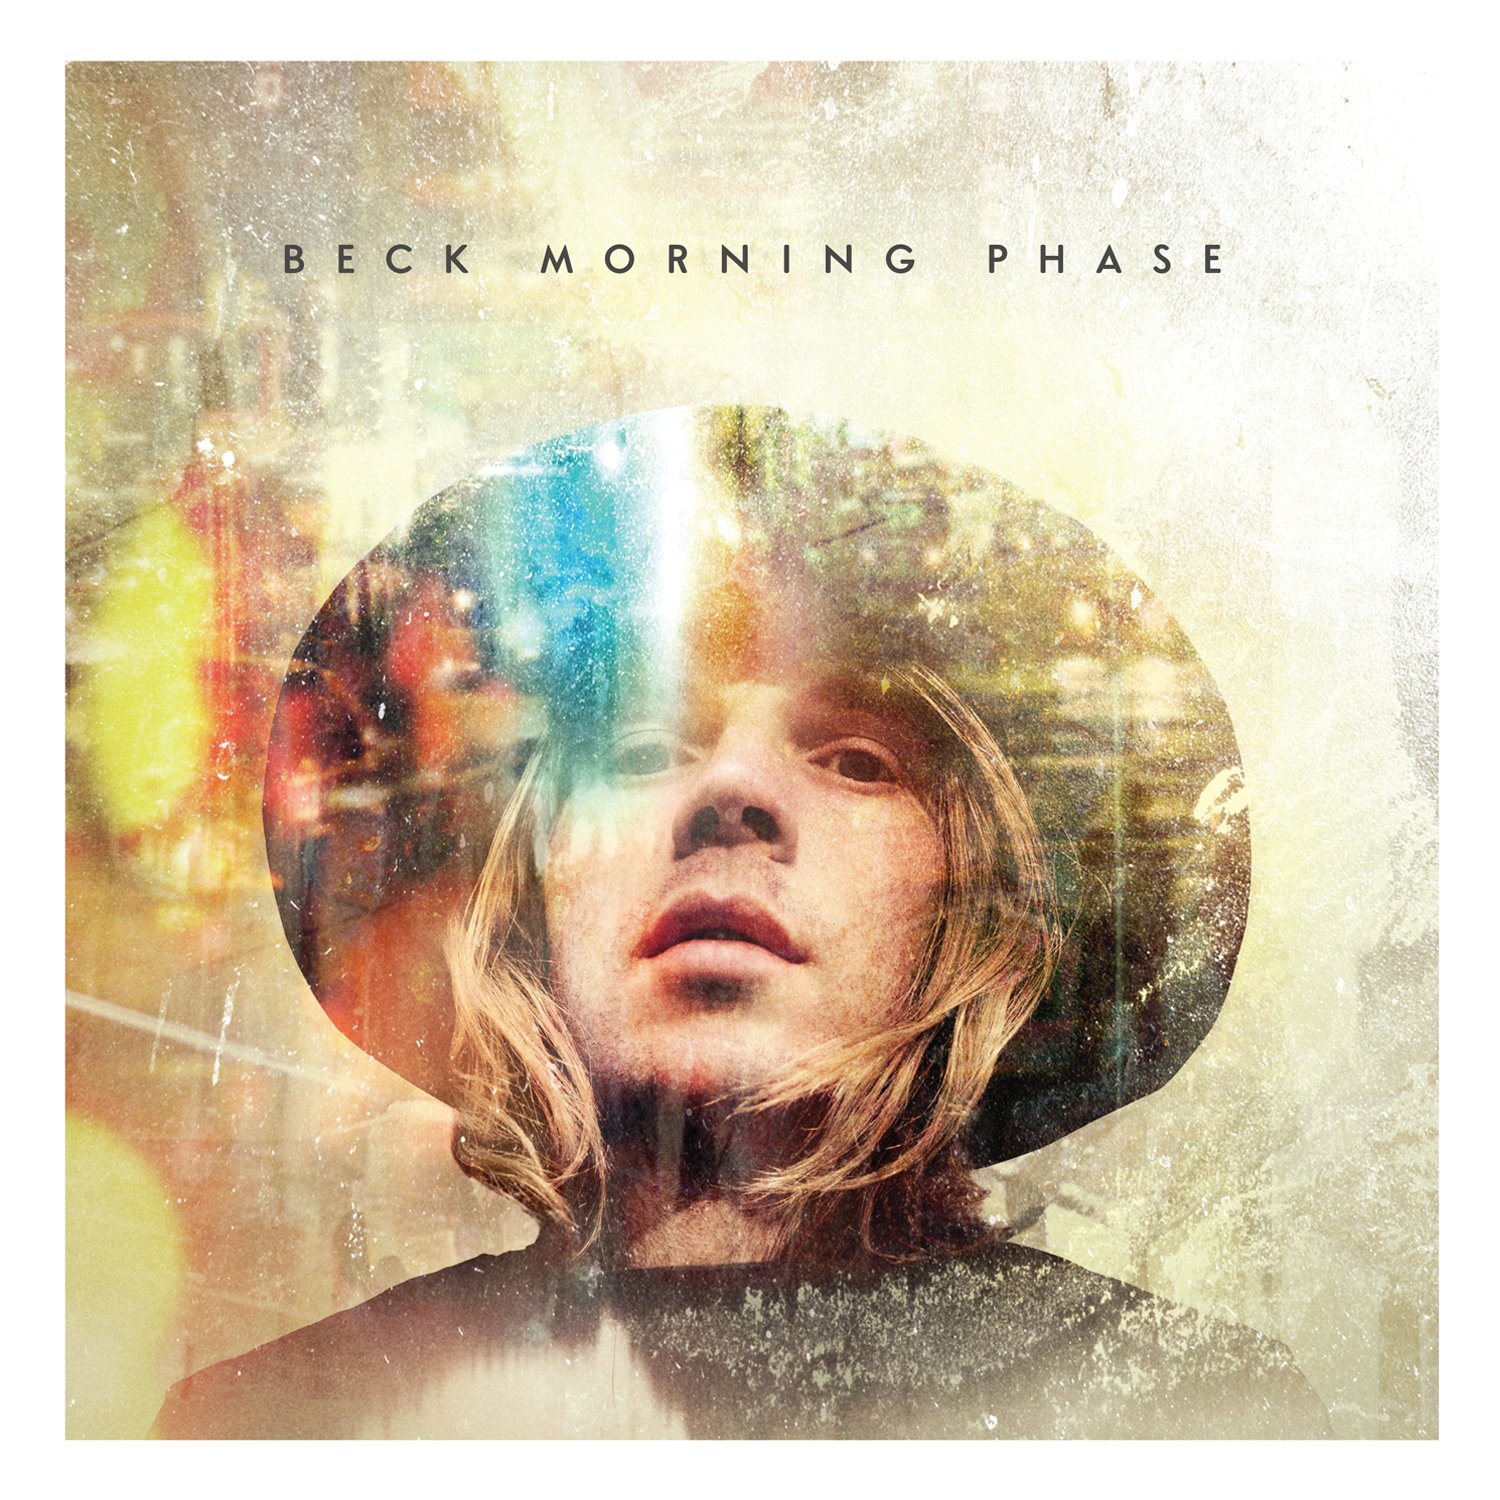 "Morning Phase" by Beck